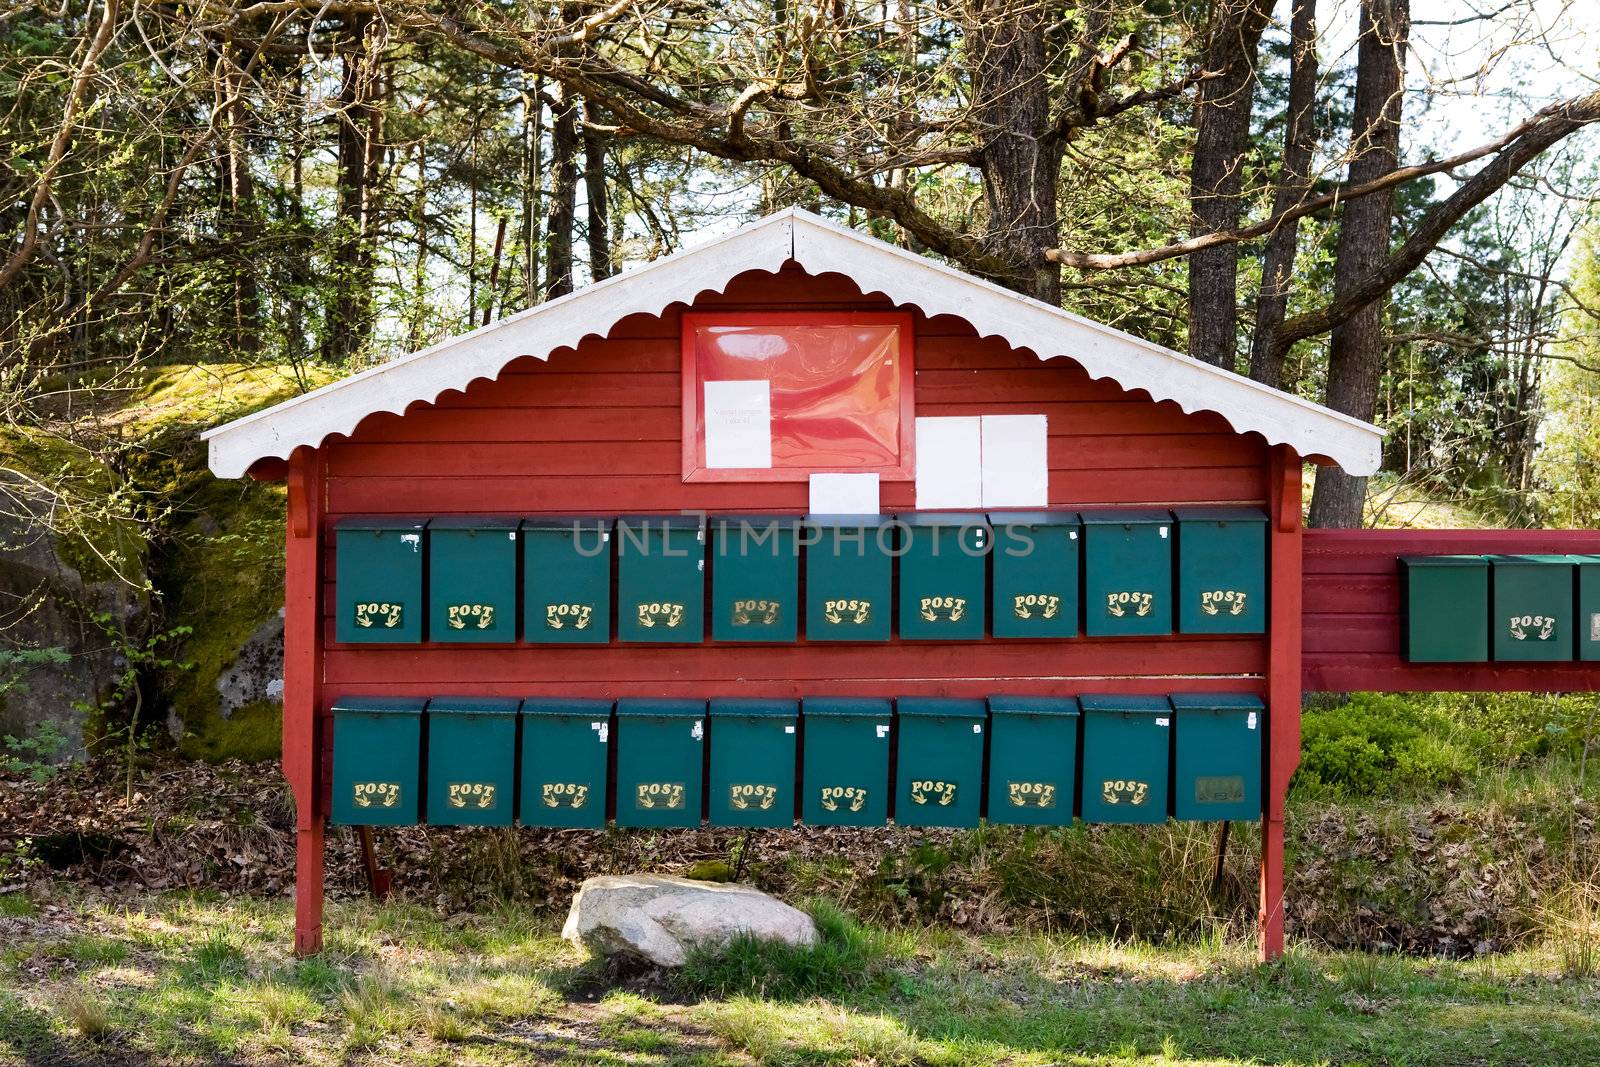 A row of mail boxes in norway